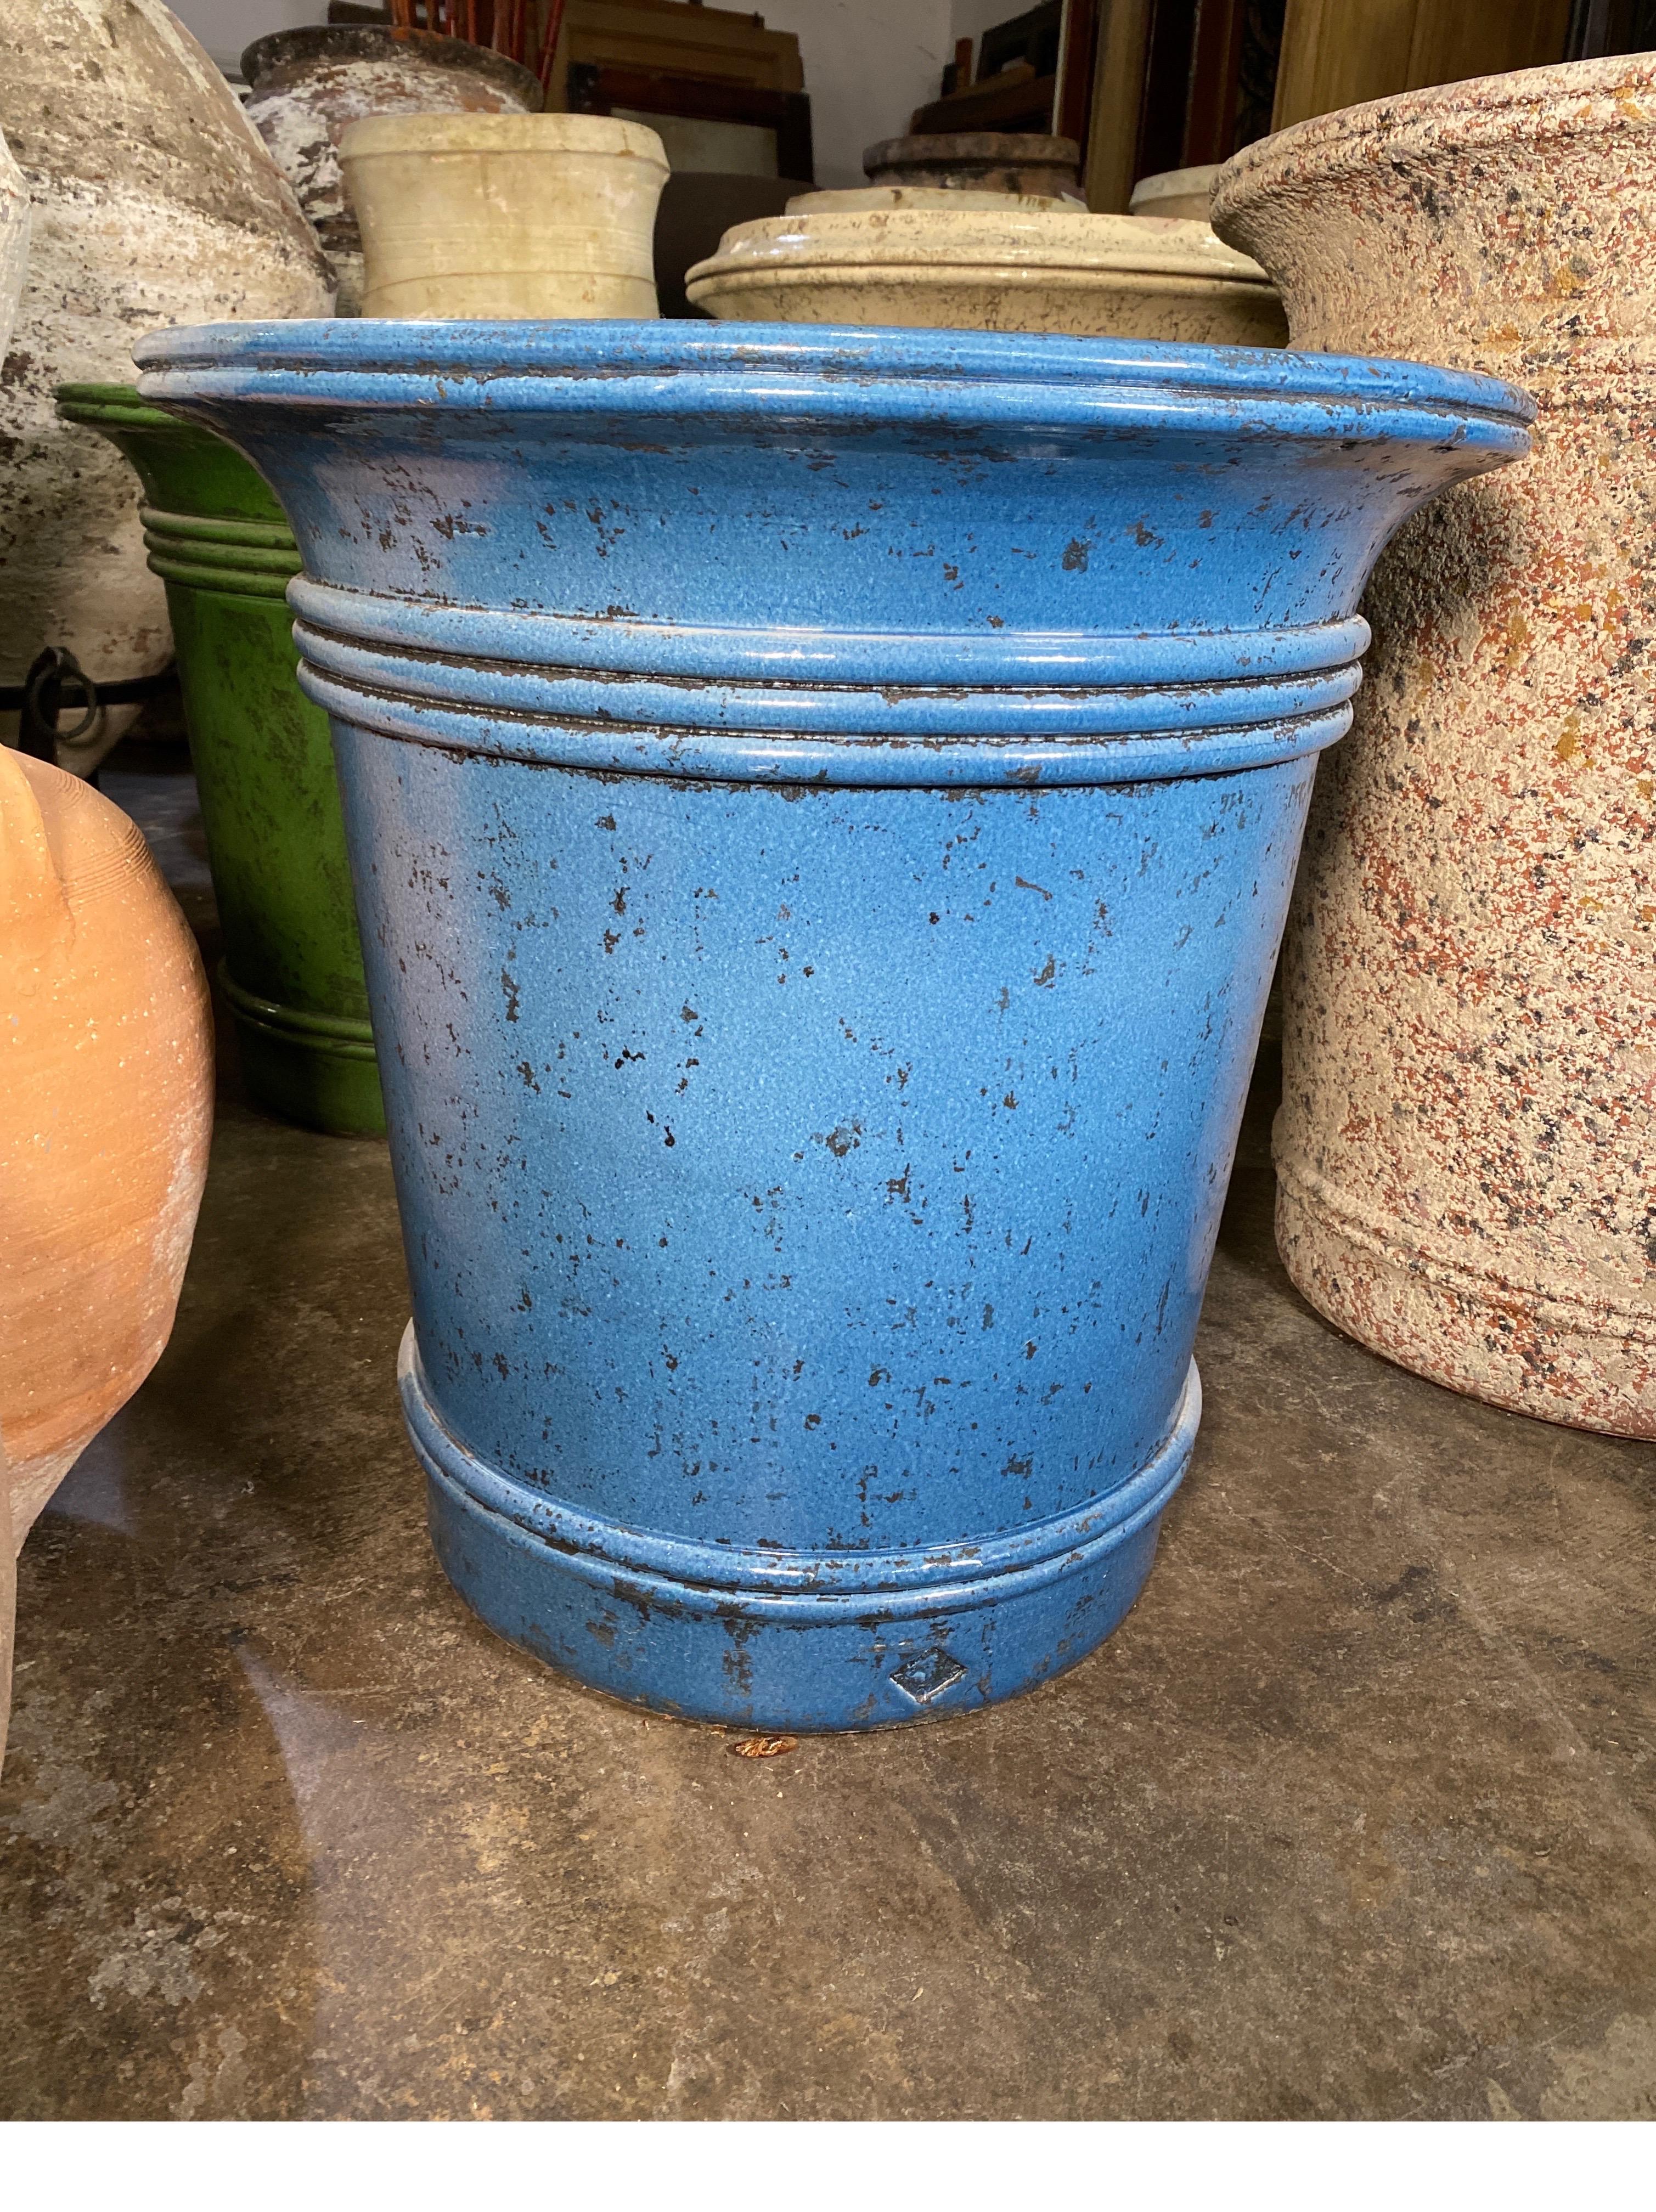 Blue terracotta Urn hand crafted in the south of France.